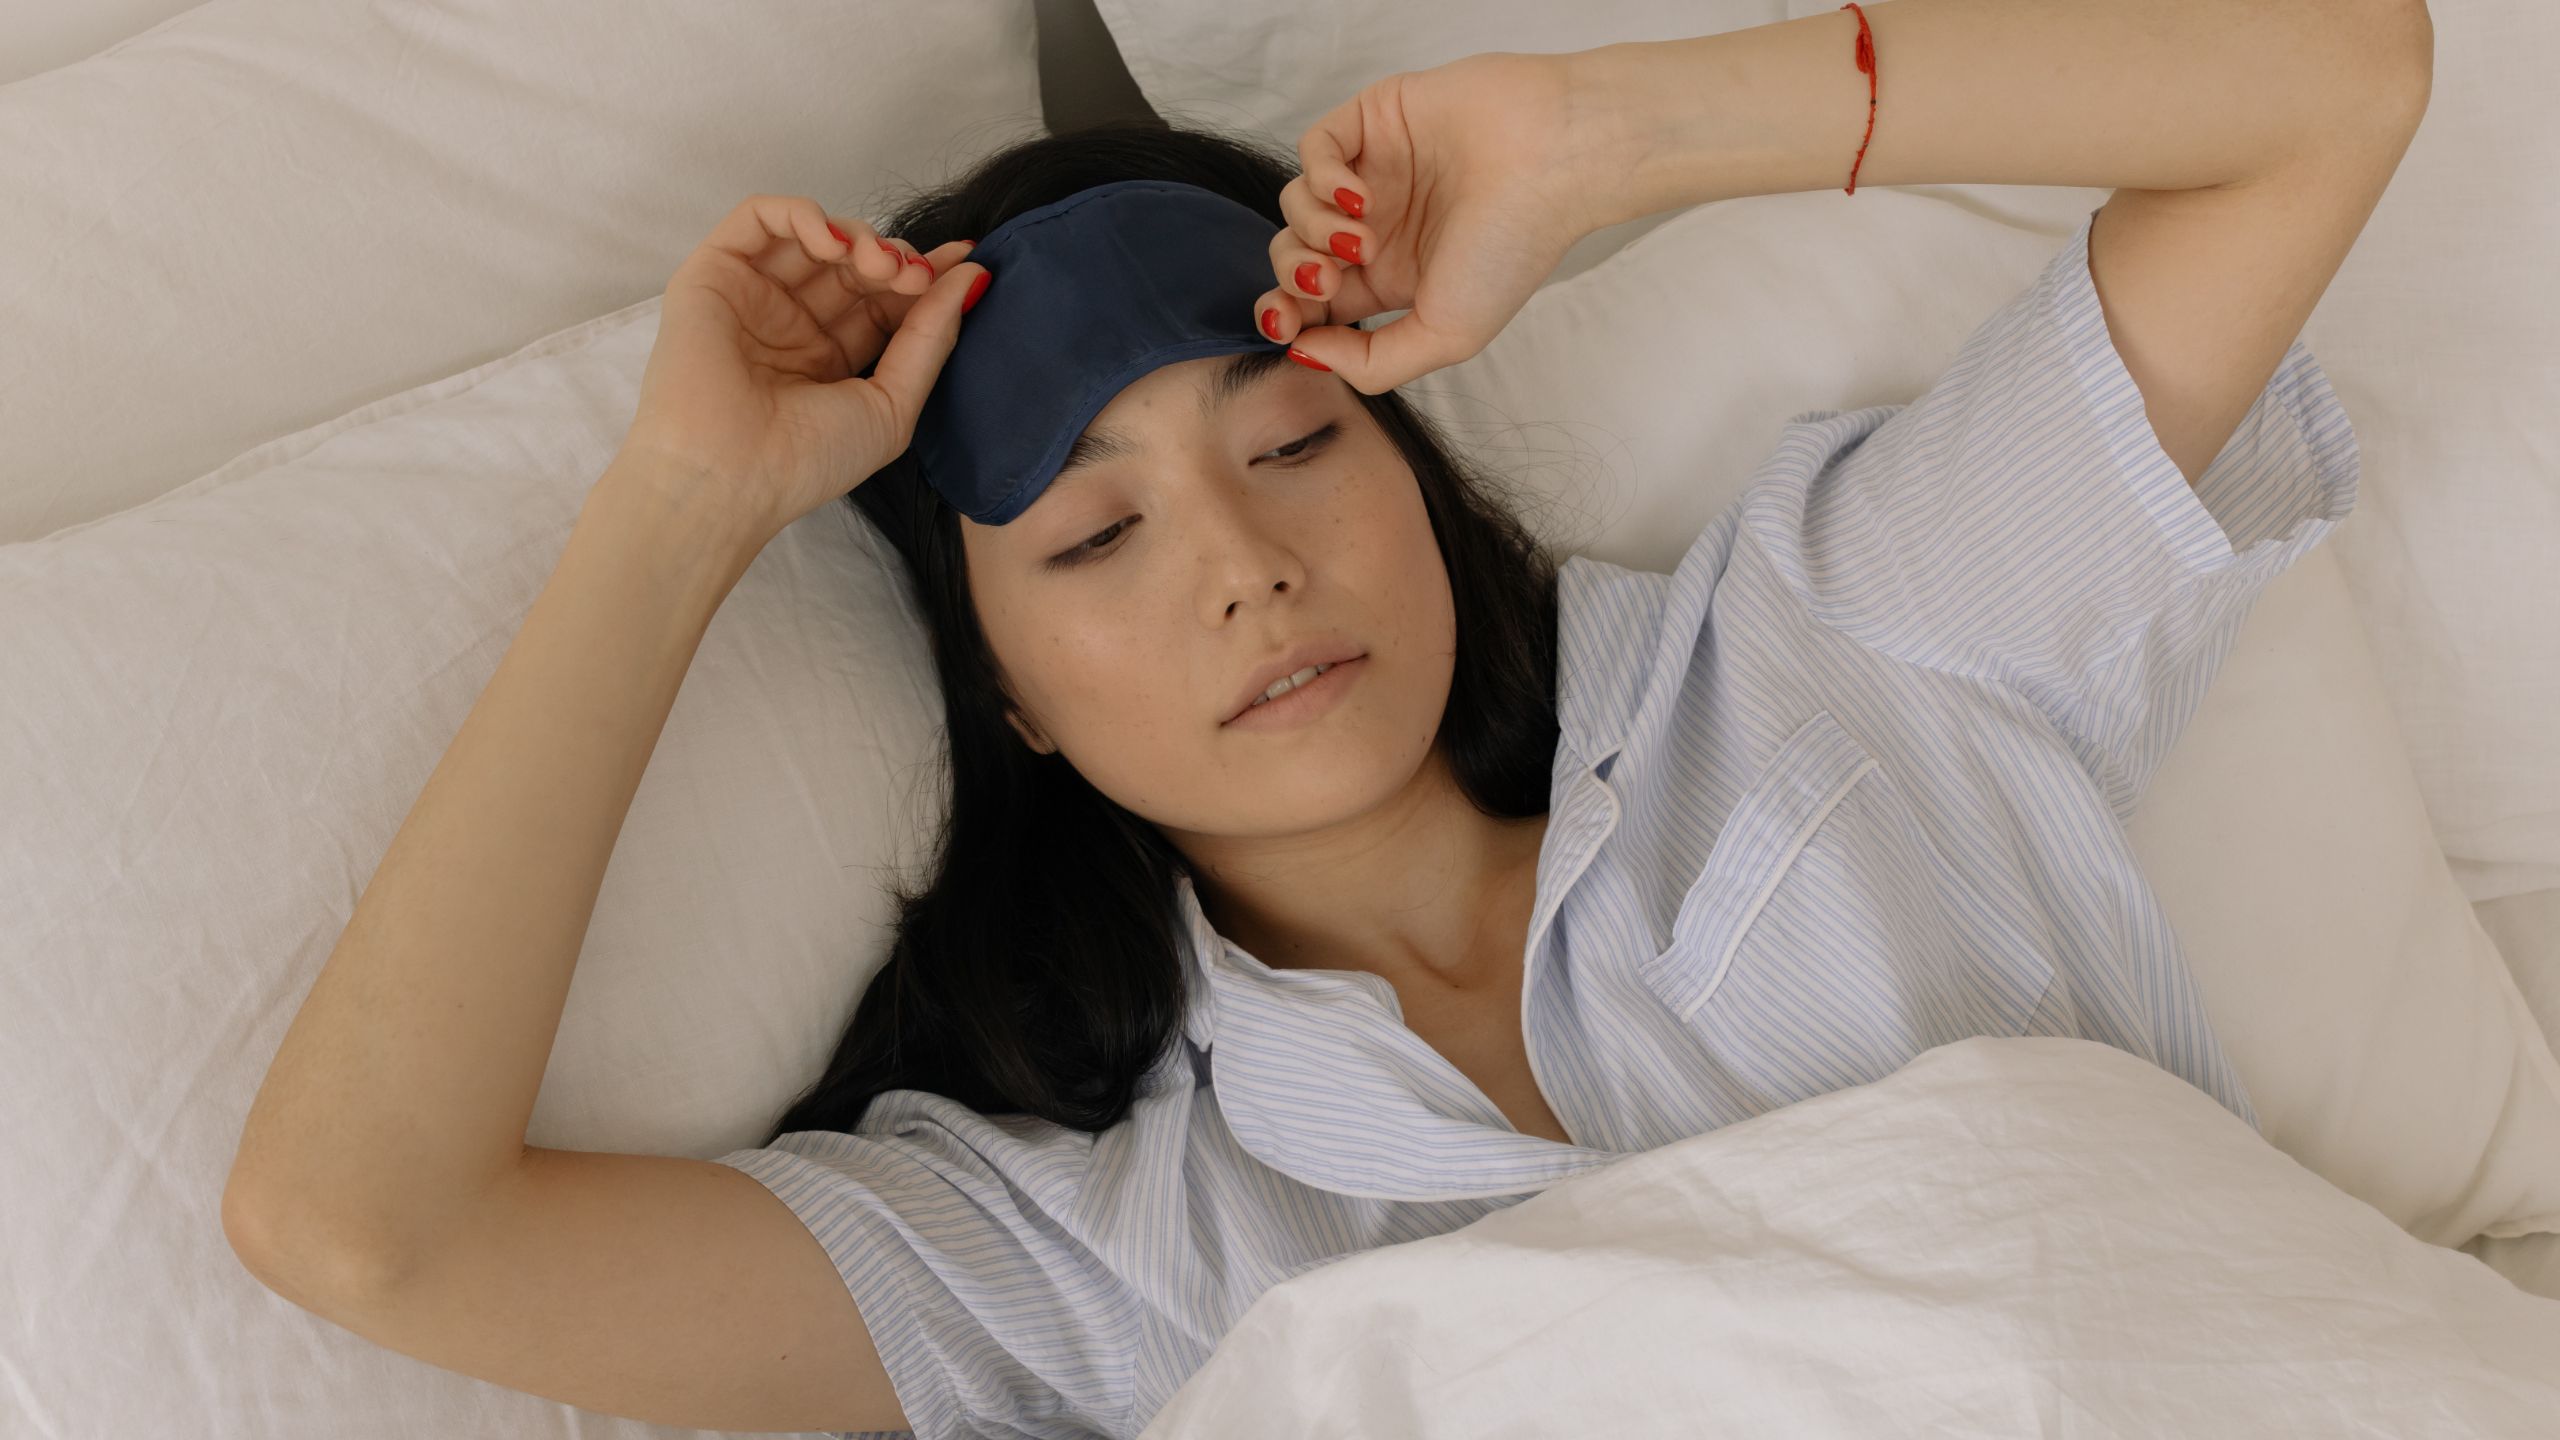 6 Surprising Reasons Why You Wake Up Exhausted Despite Getting Eight Hours of Sleep